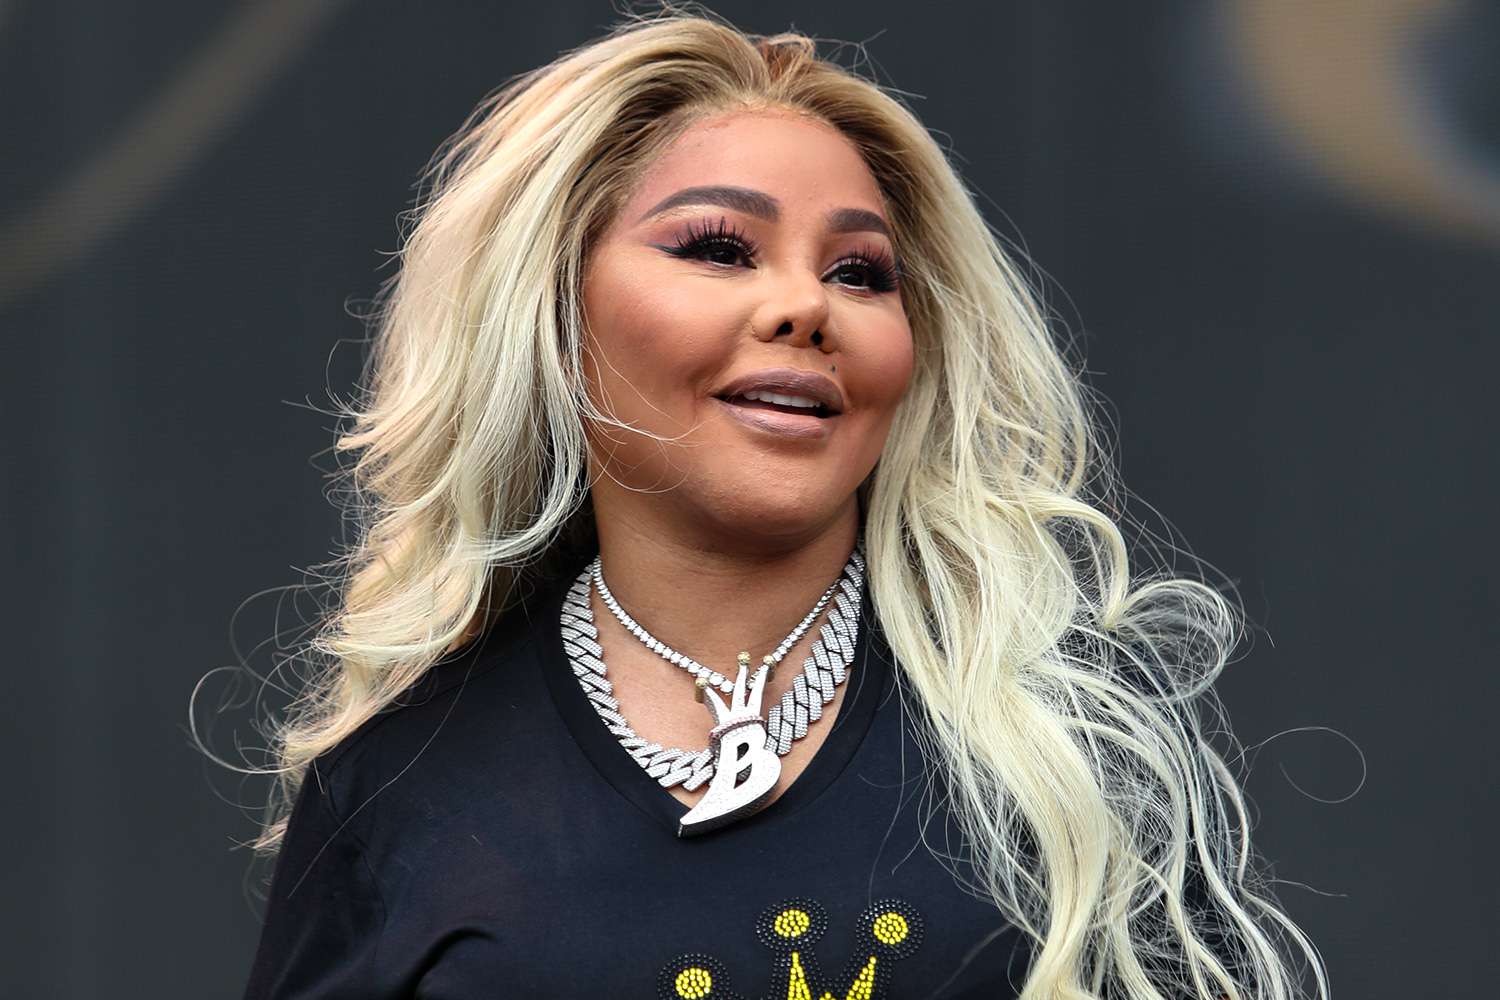 30 Facts about Lil Kim - Facts.net